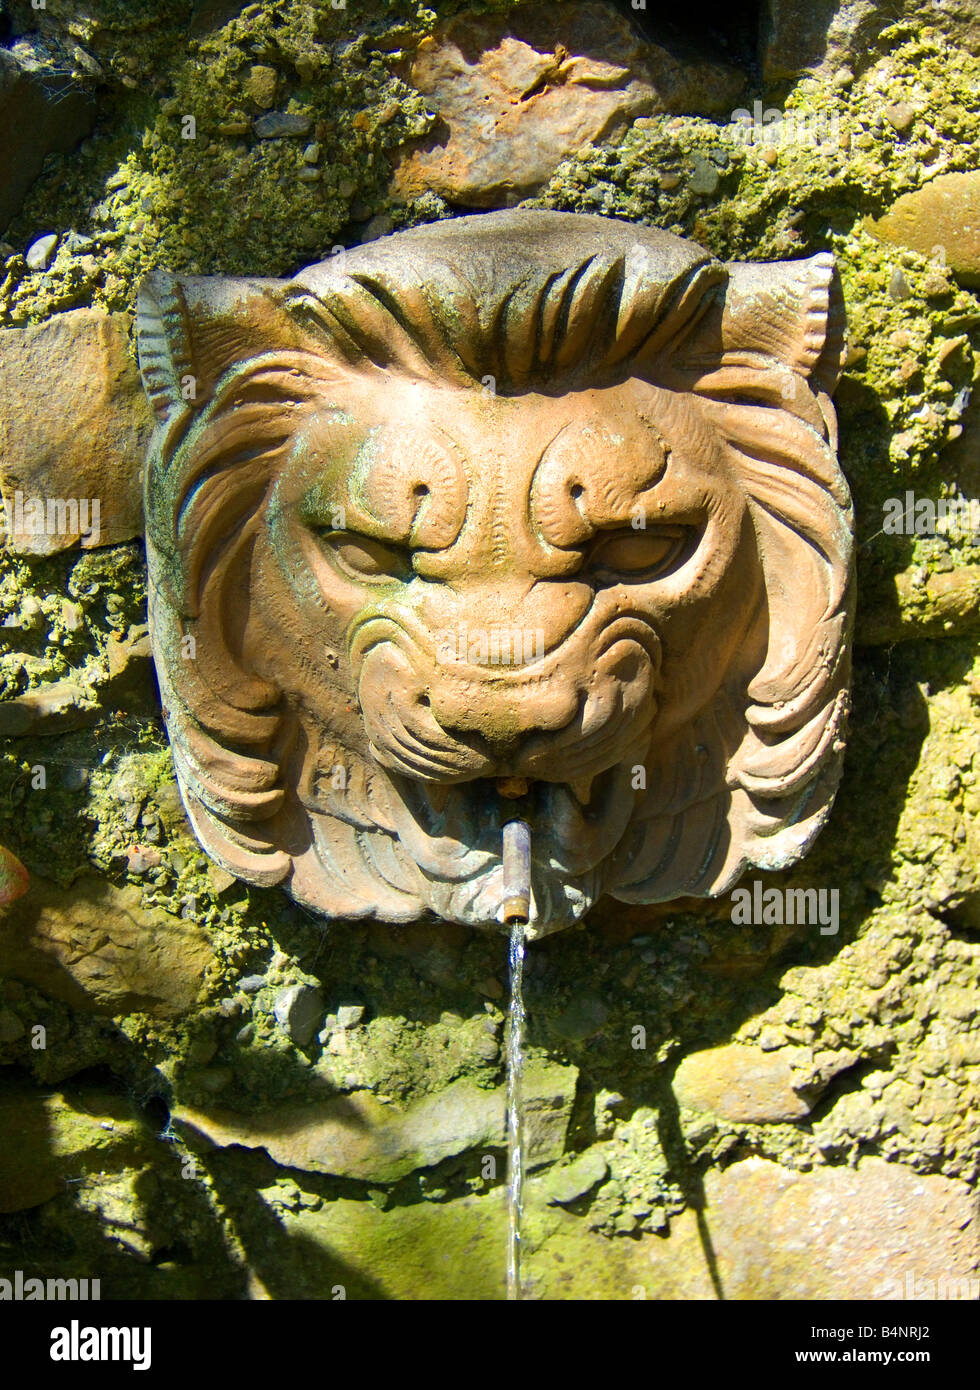 A lions head sculpture waterspout fountain mounted on a wall Stock Photo